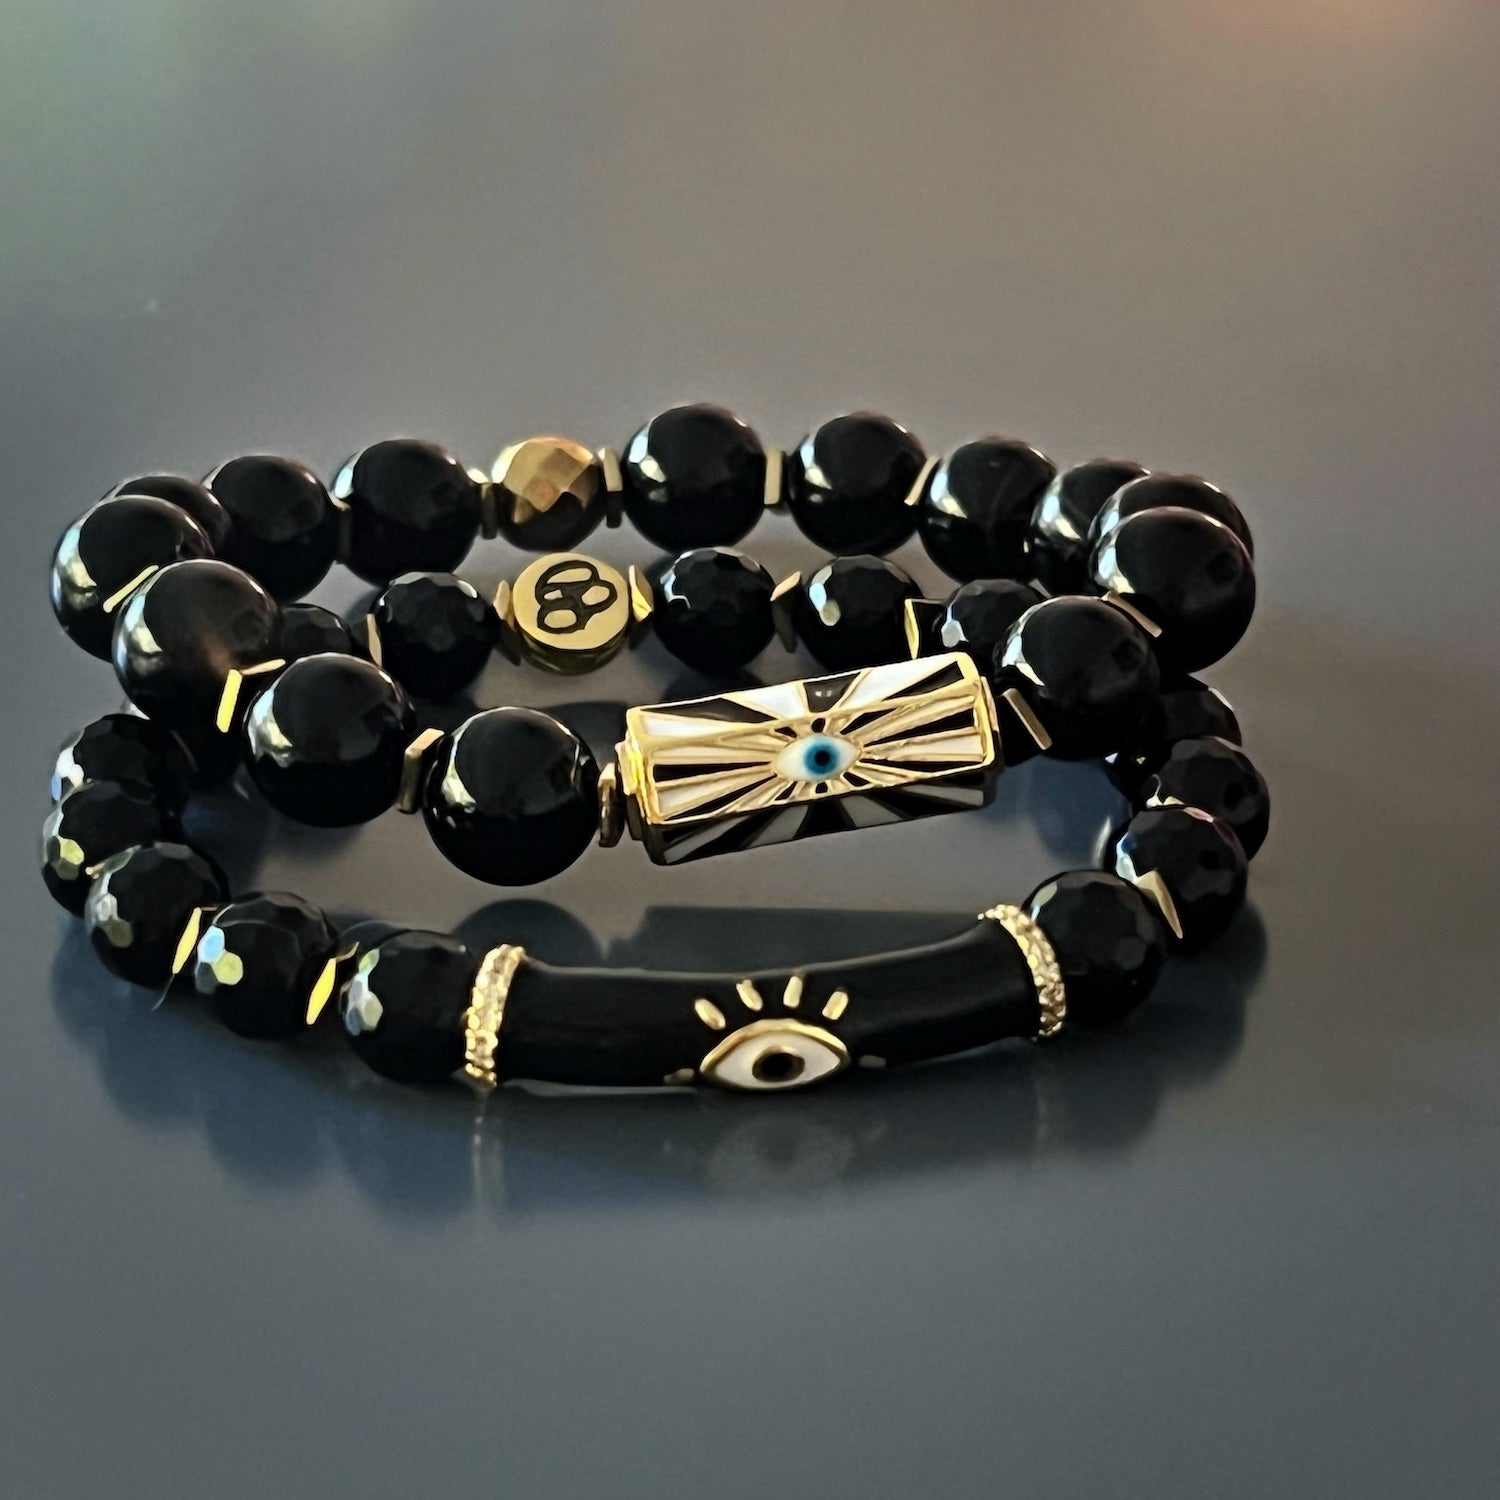 Unique Black Onyx and Gold Bracelet for Protection and Positivity